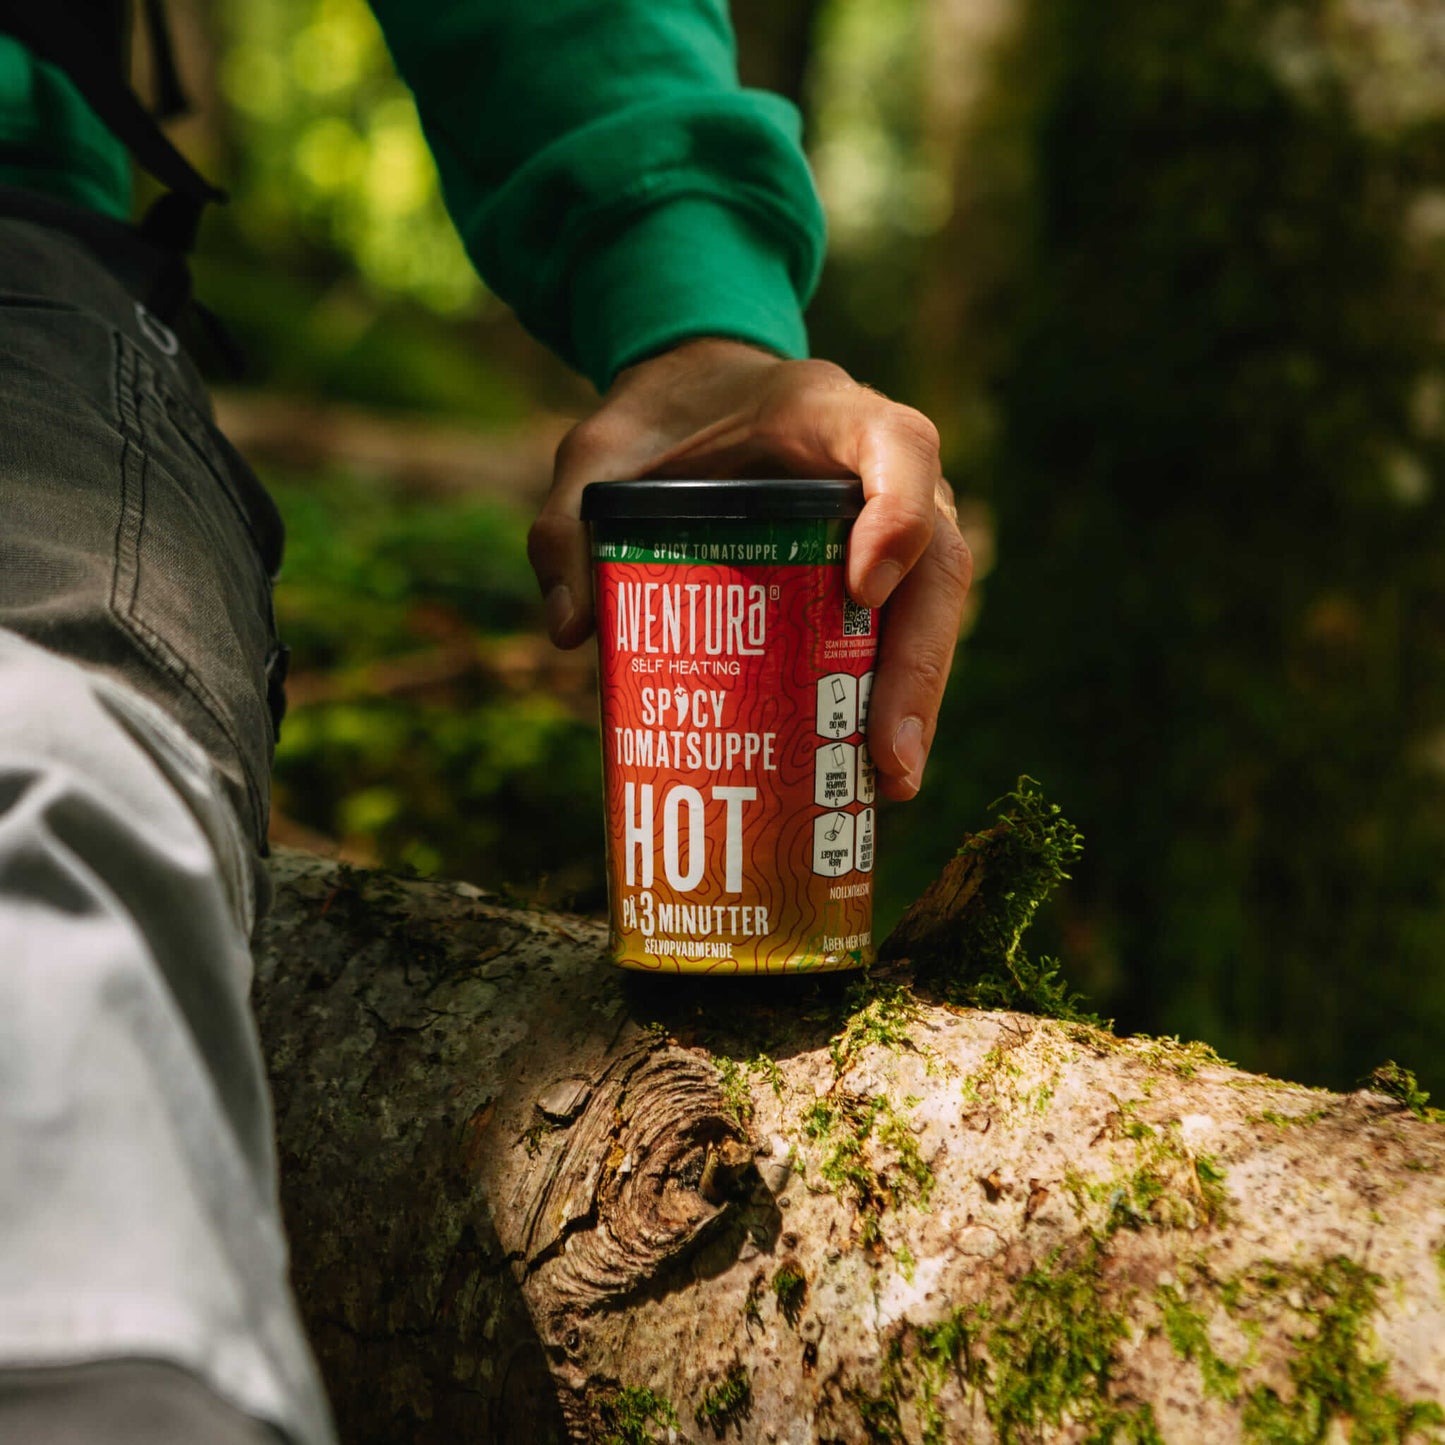 Aventura Self Heating Spicy Tomato Soup Hot in 3 minutes being placed down on a log in a forest held by a person